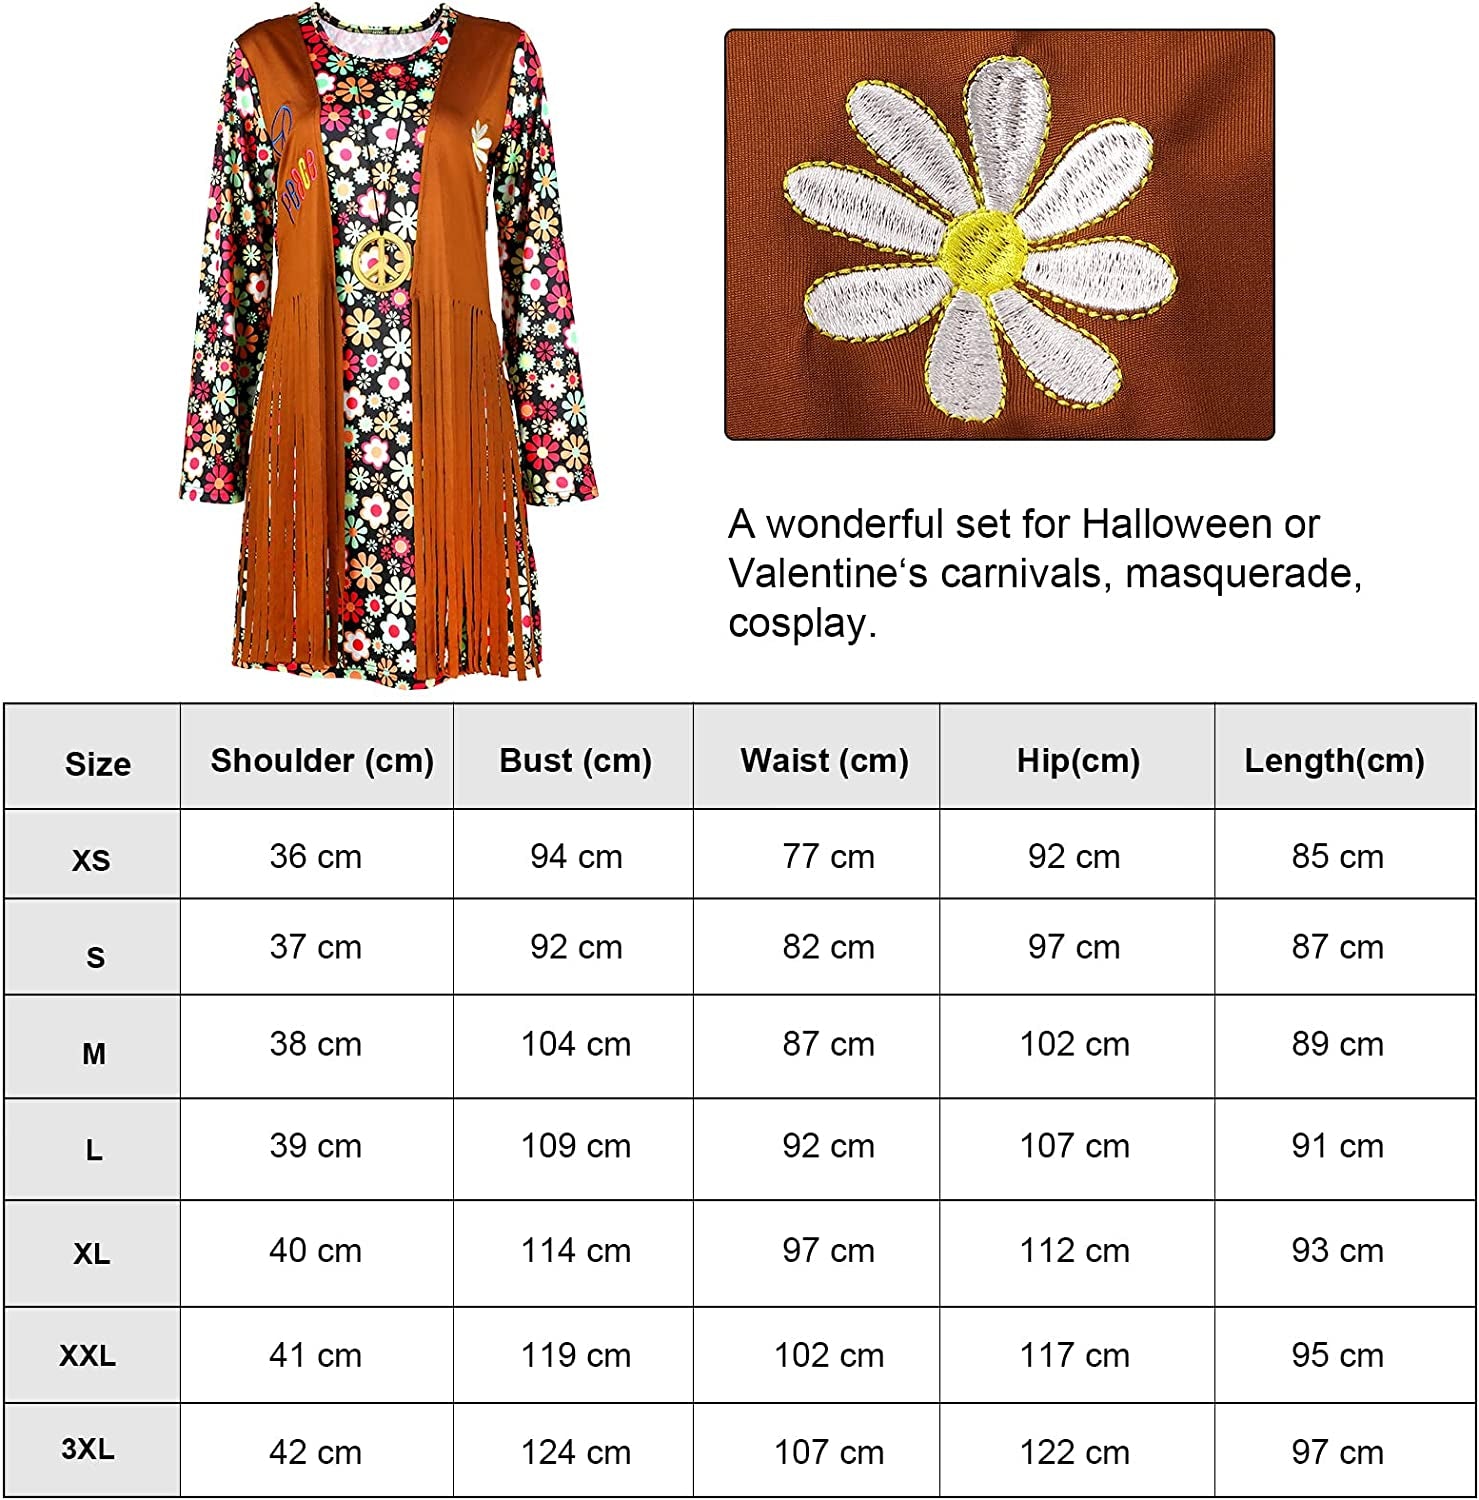 Poor Quality-Women Hippie Costume Set Peace Sign Earring Necklace Headband Dress Ankle Socks Poor Quality